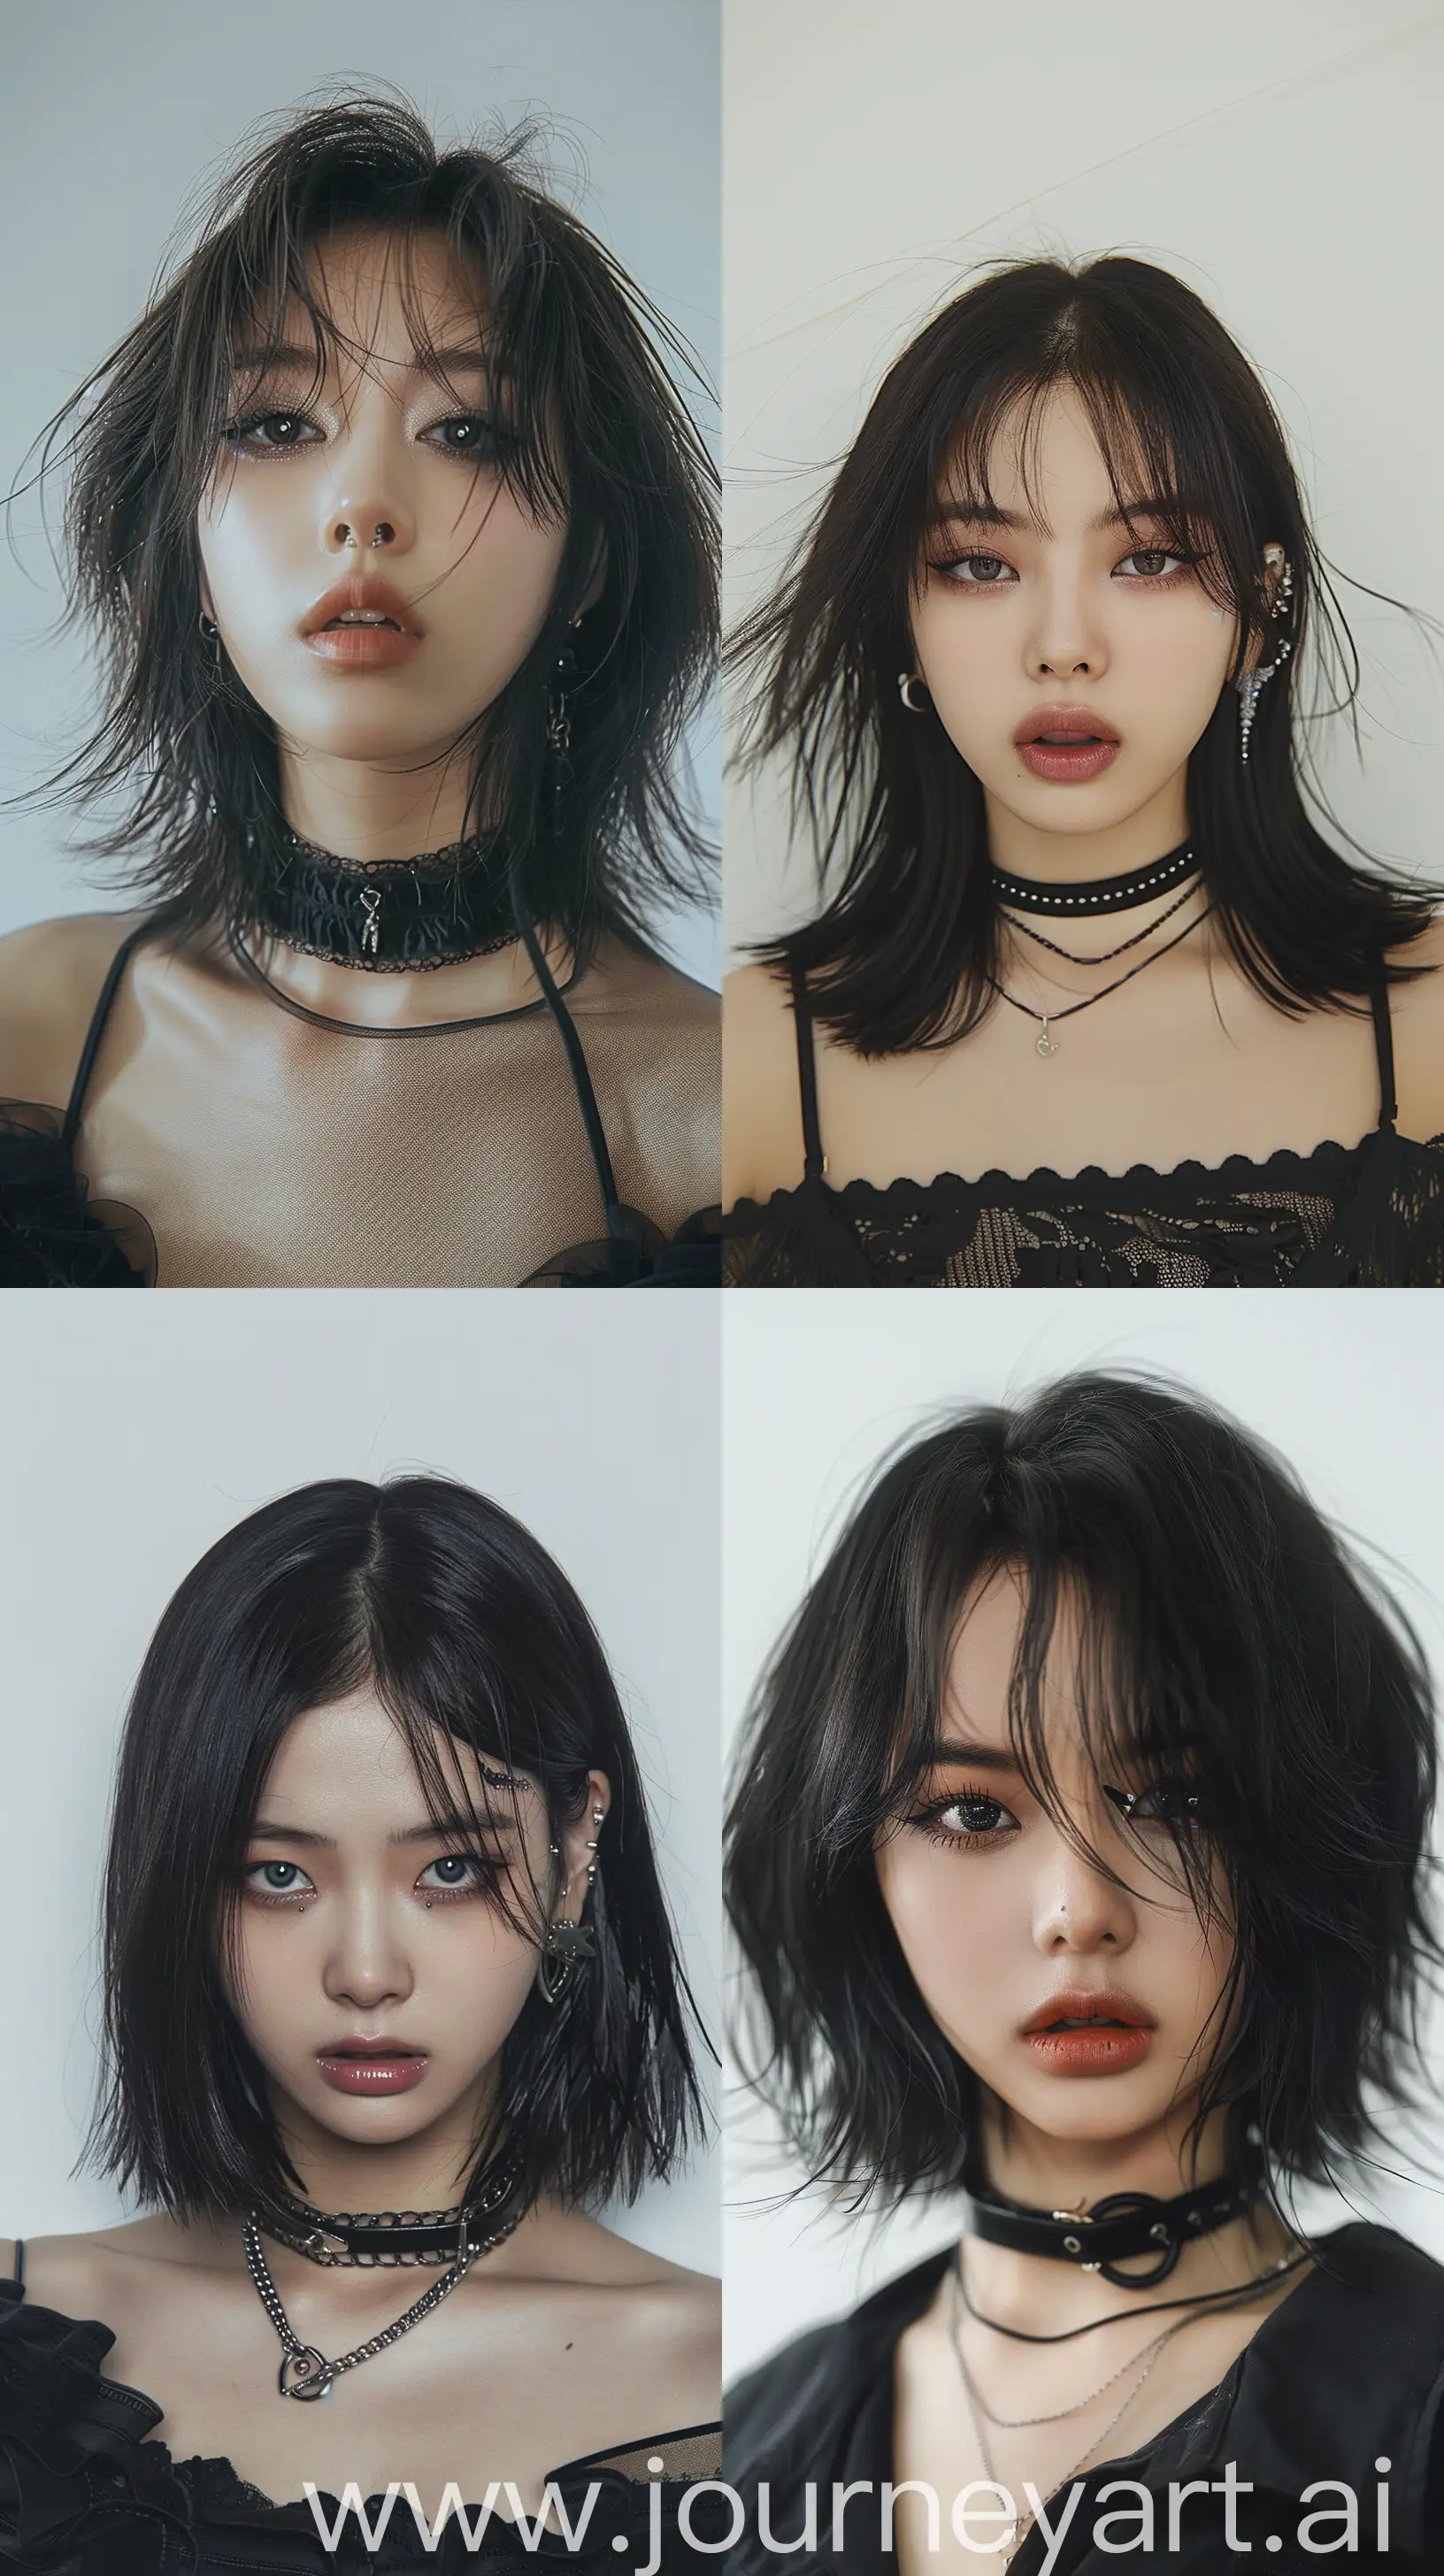 Blackpinks-Jennie-Inspired-Portrait-with-Medium-Wolfcut-Hair-and-Grunge-Aesthetic-Makeup-on-White-Background